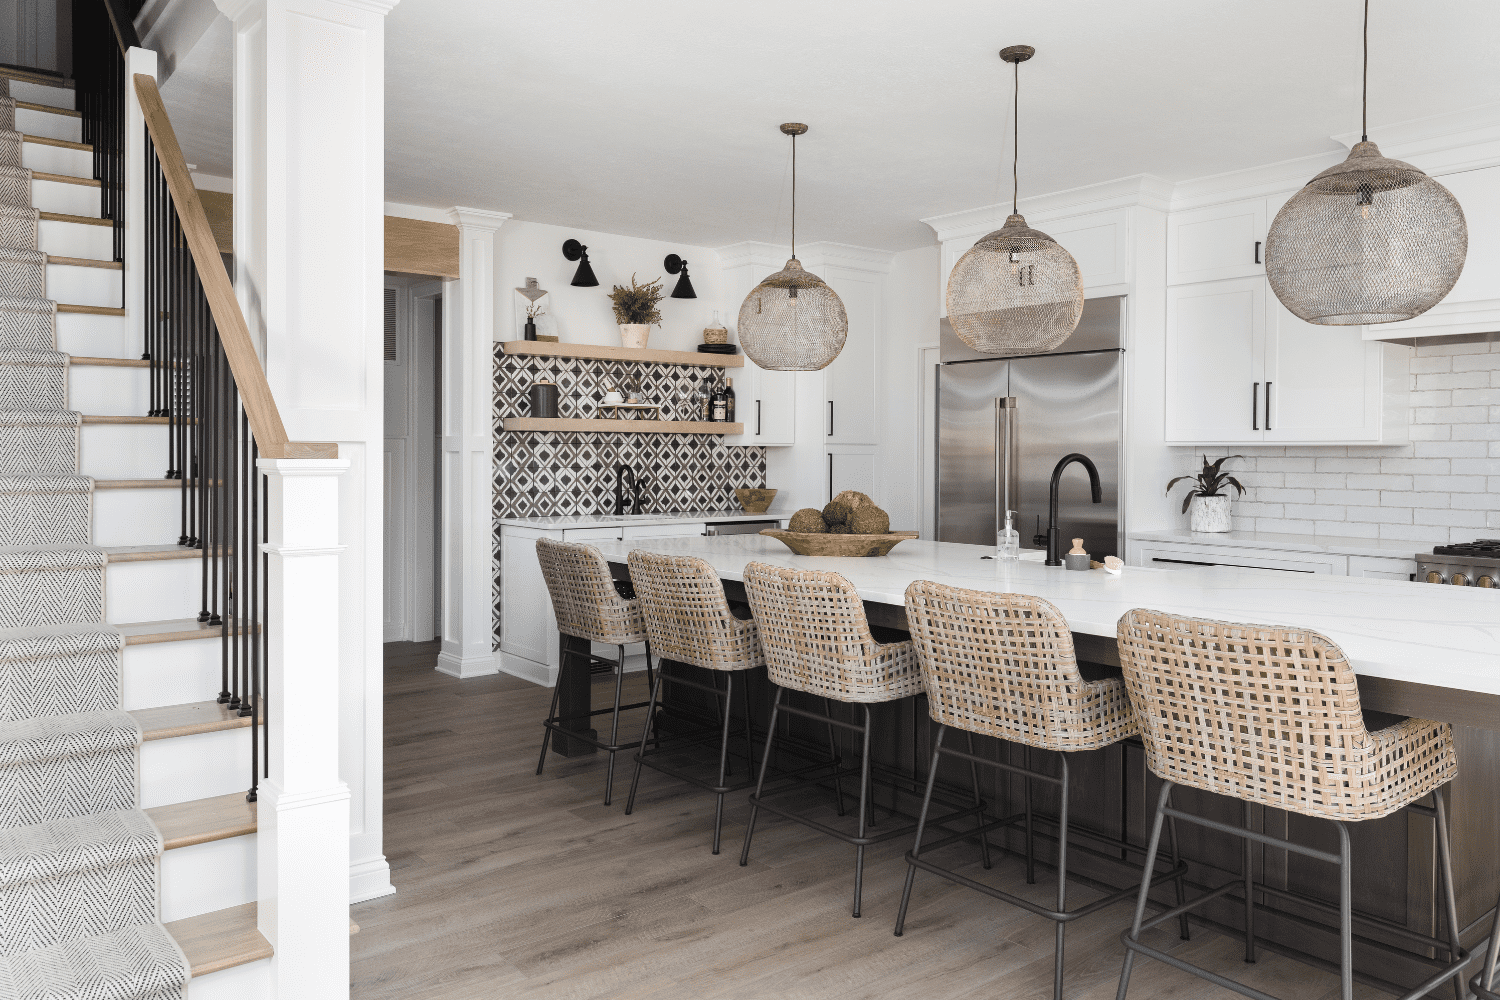 Nicholas Design Build | A kitchen with a white island and wicker stools.